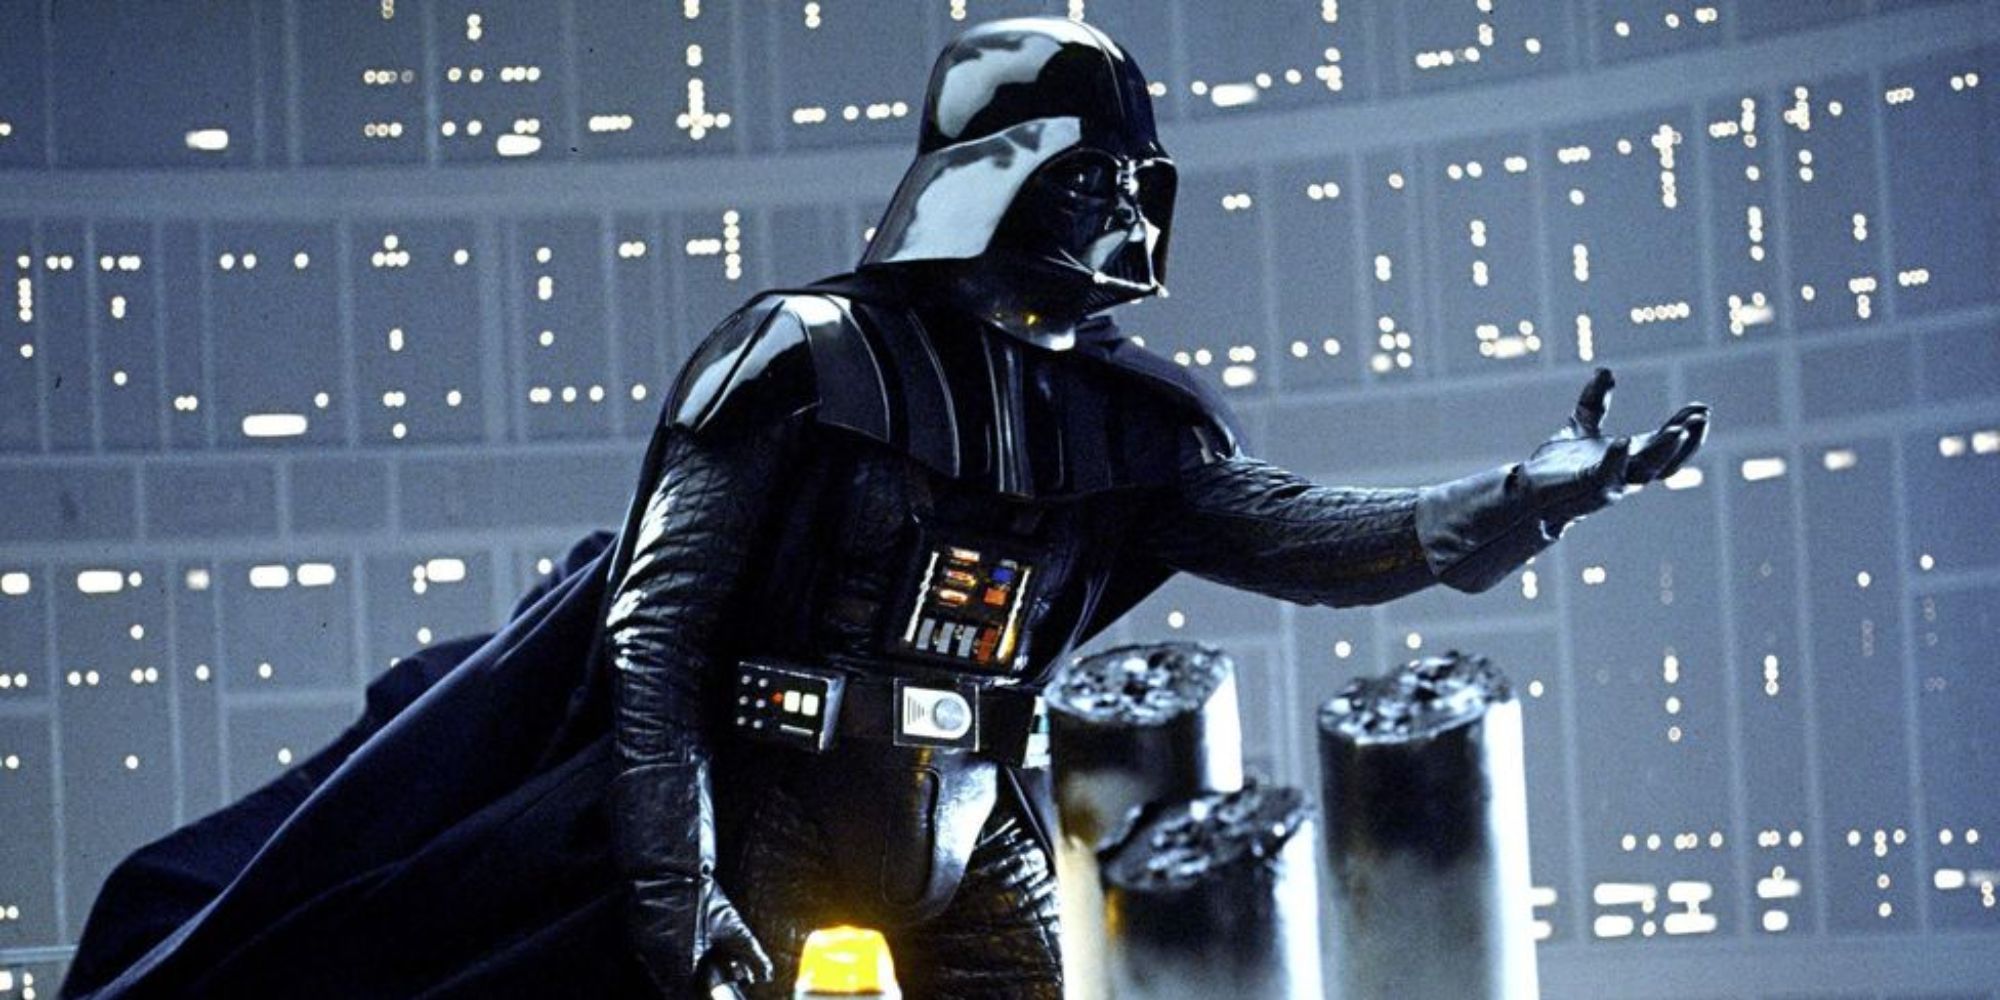 Darth Vader reaches his hand out